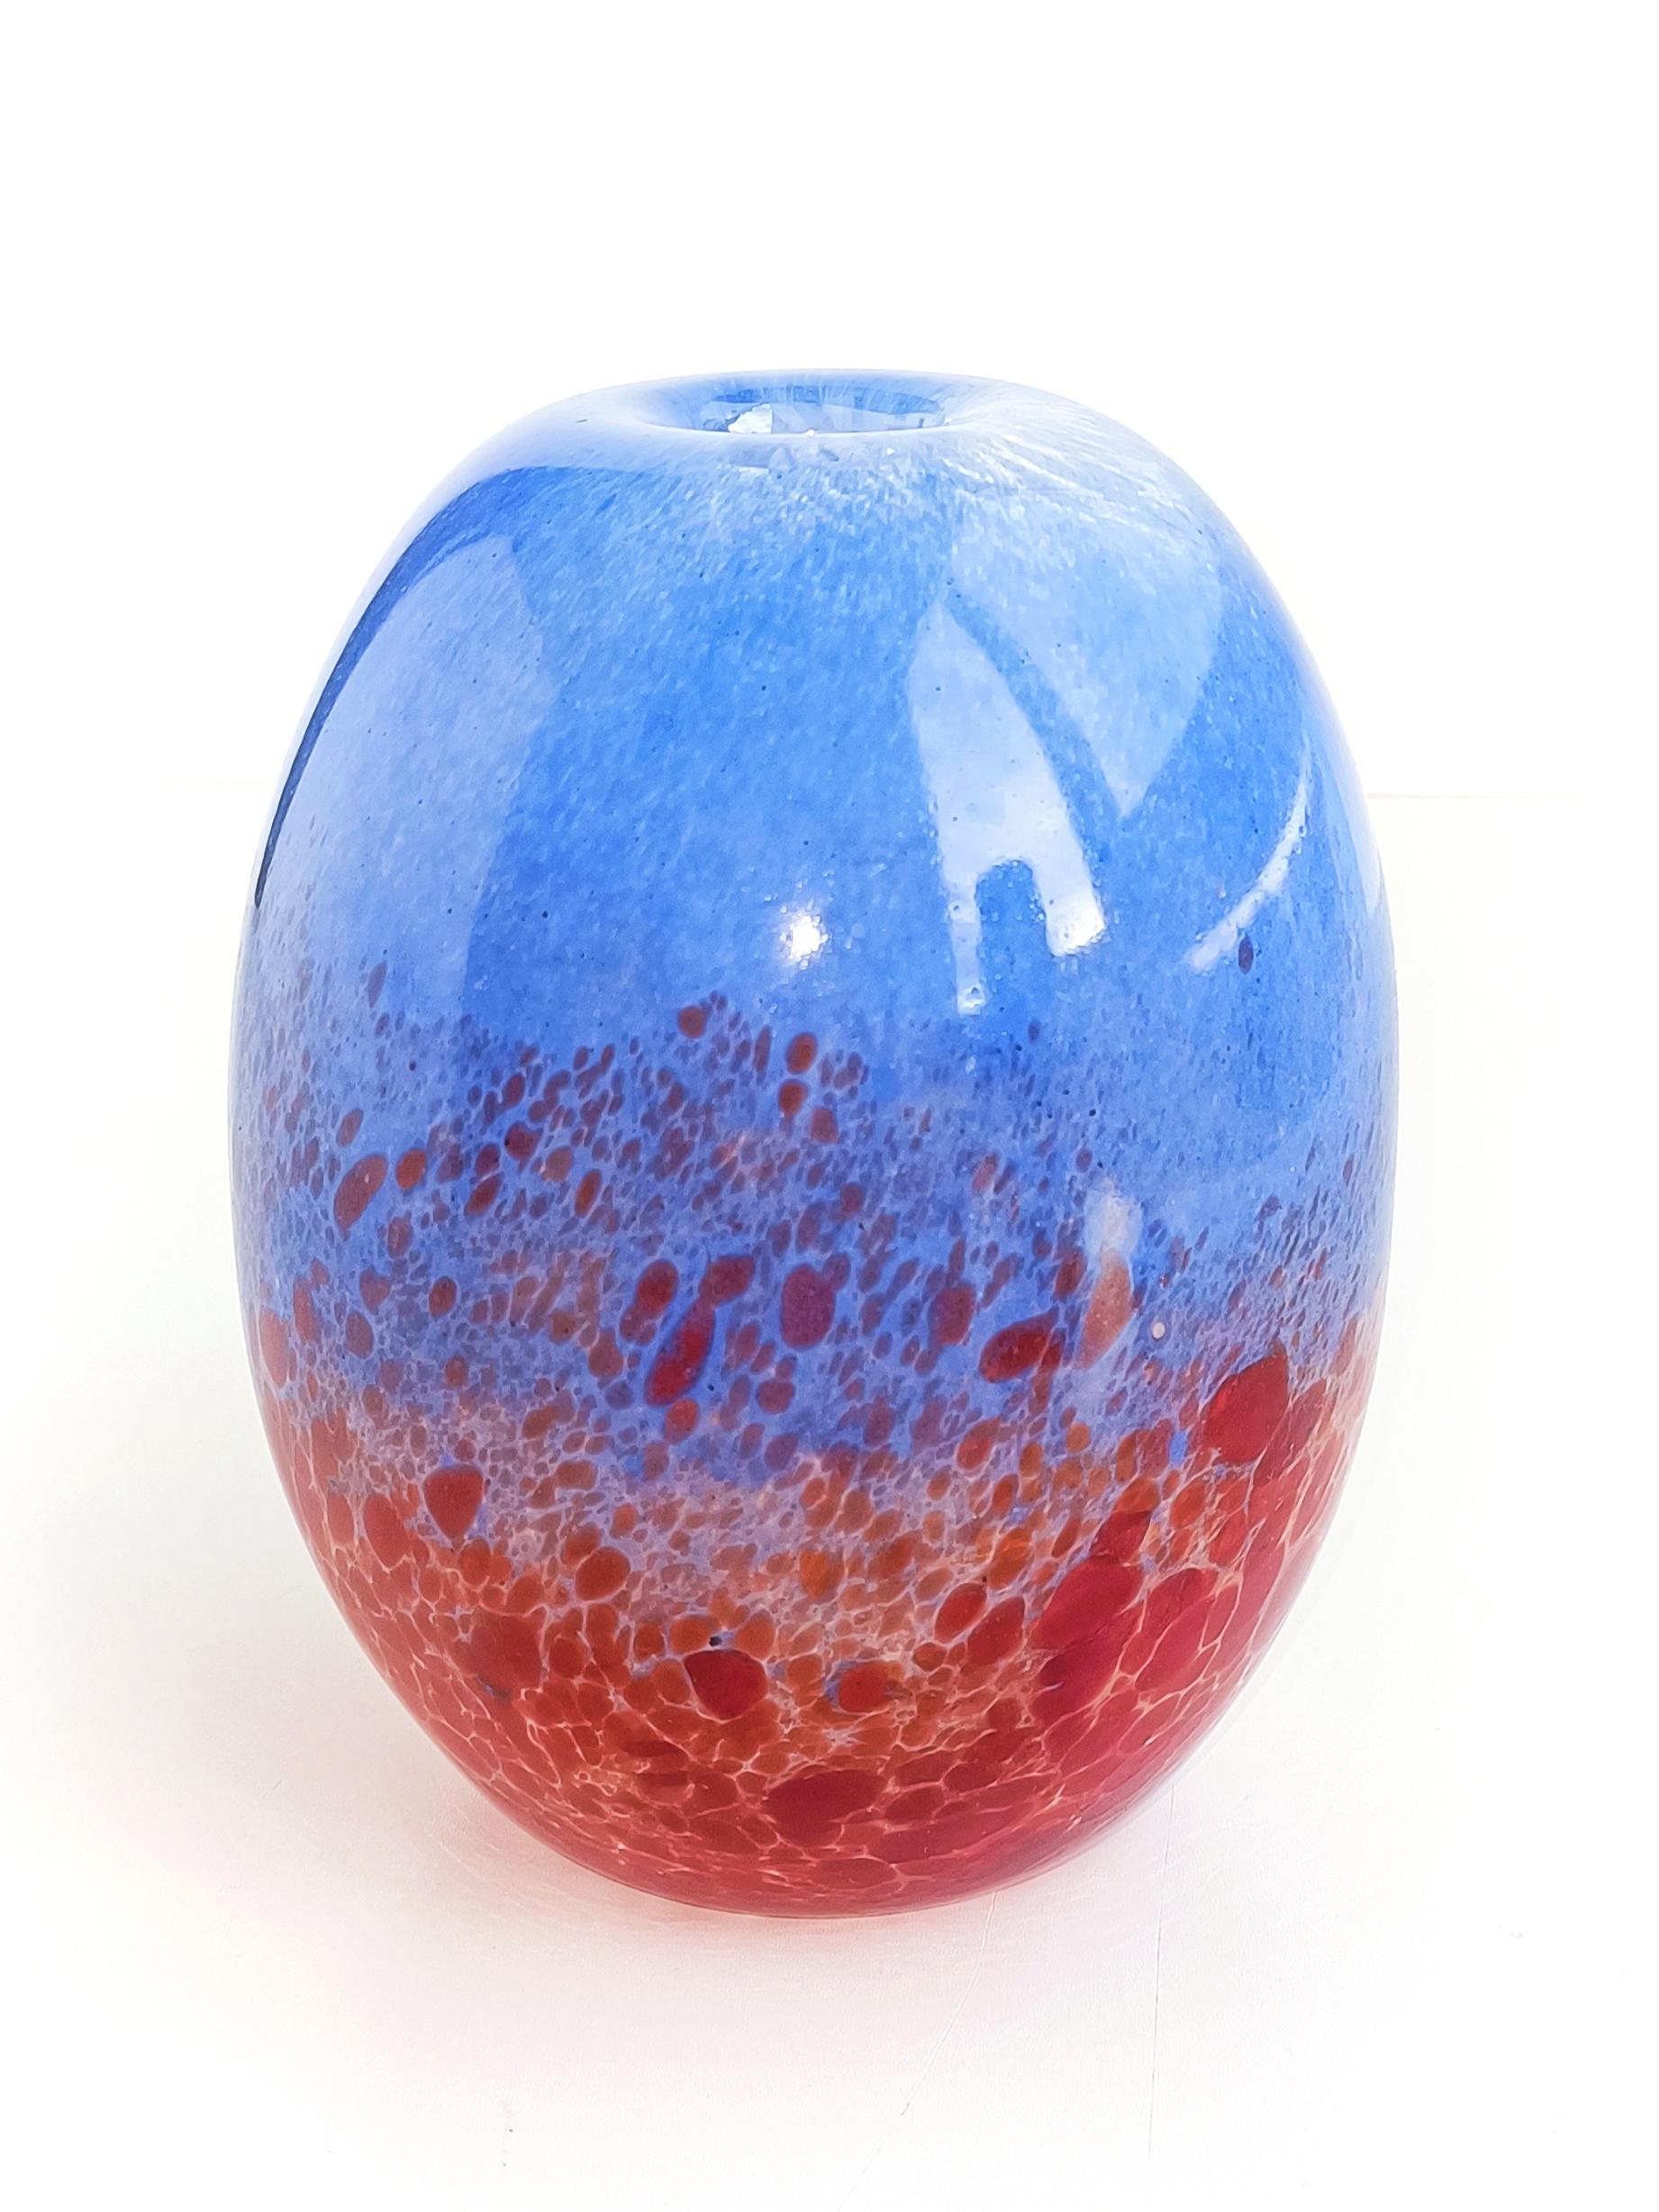 Murano glass vase attributed to Venice glass artist Anzolo Fuga for A.Ve.M. Handcrafted in the Murano island near Venice, Italy, circa the 1950s.

It is spectacular in the hand - the way the glass is worked along the ovoid shape blending the red